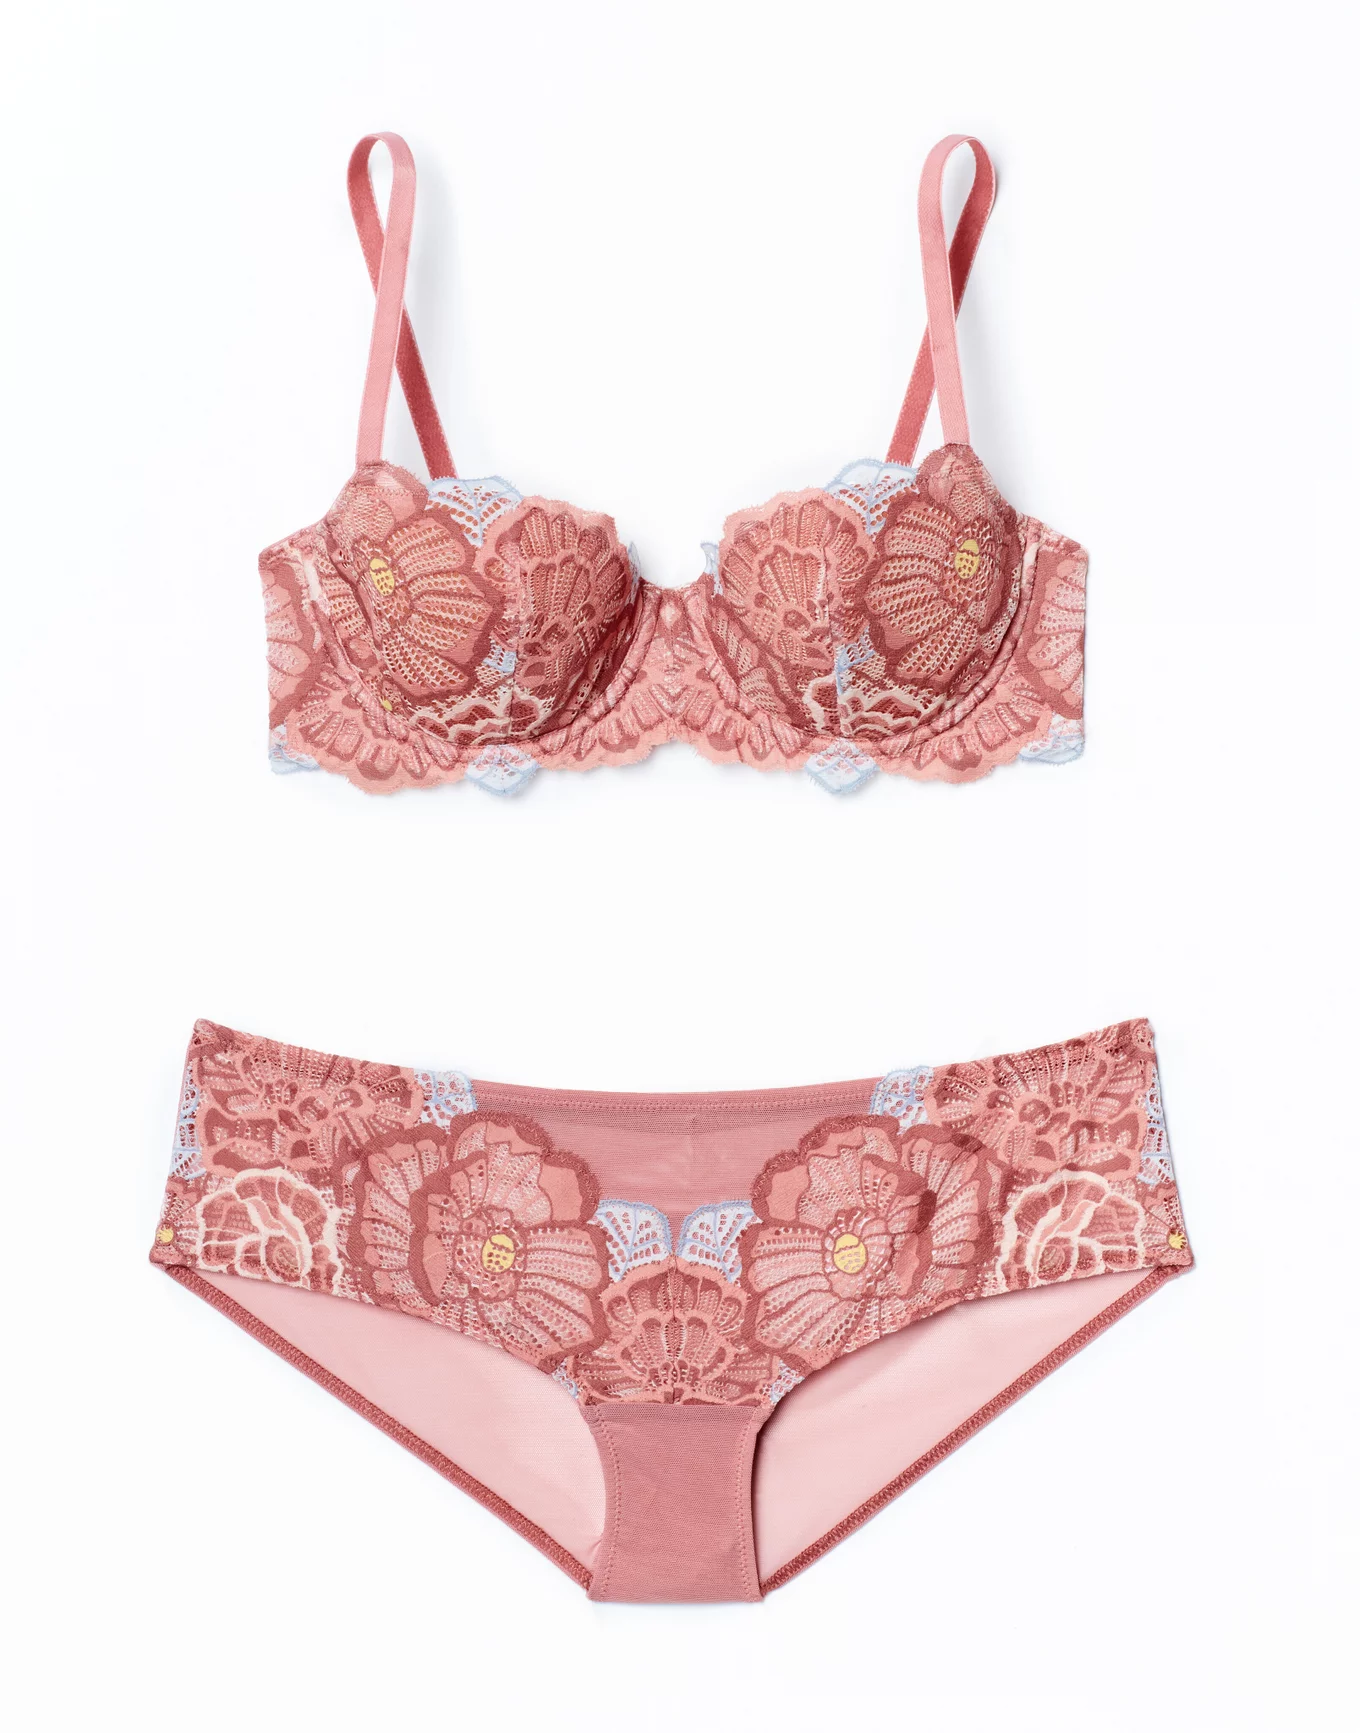 Luvlette Plus Lightly Lined Balconette Floral Lace Bra